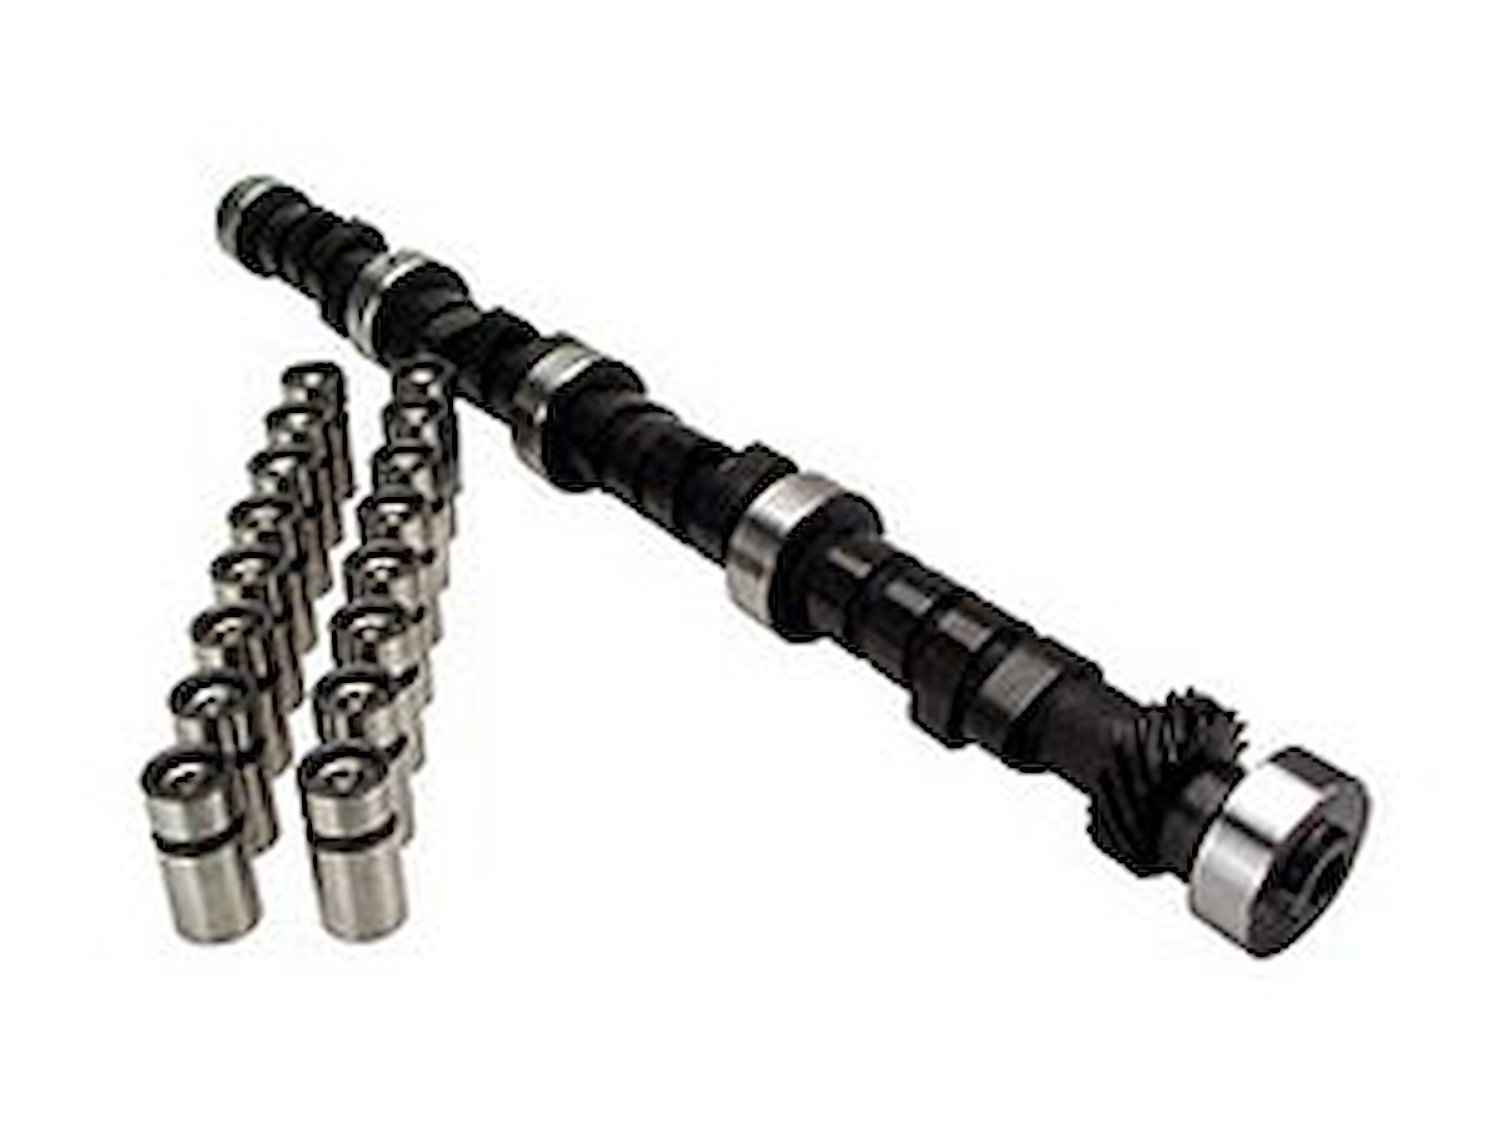 Xtreme Energy 262H Hydraulic Flat Tappet Camshaft & Lifter Kit Lift .462"/.470" Duration 262°/270° RPM Range 1300-5600